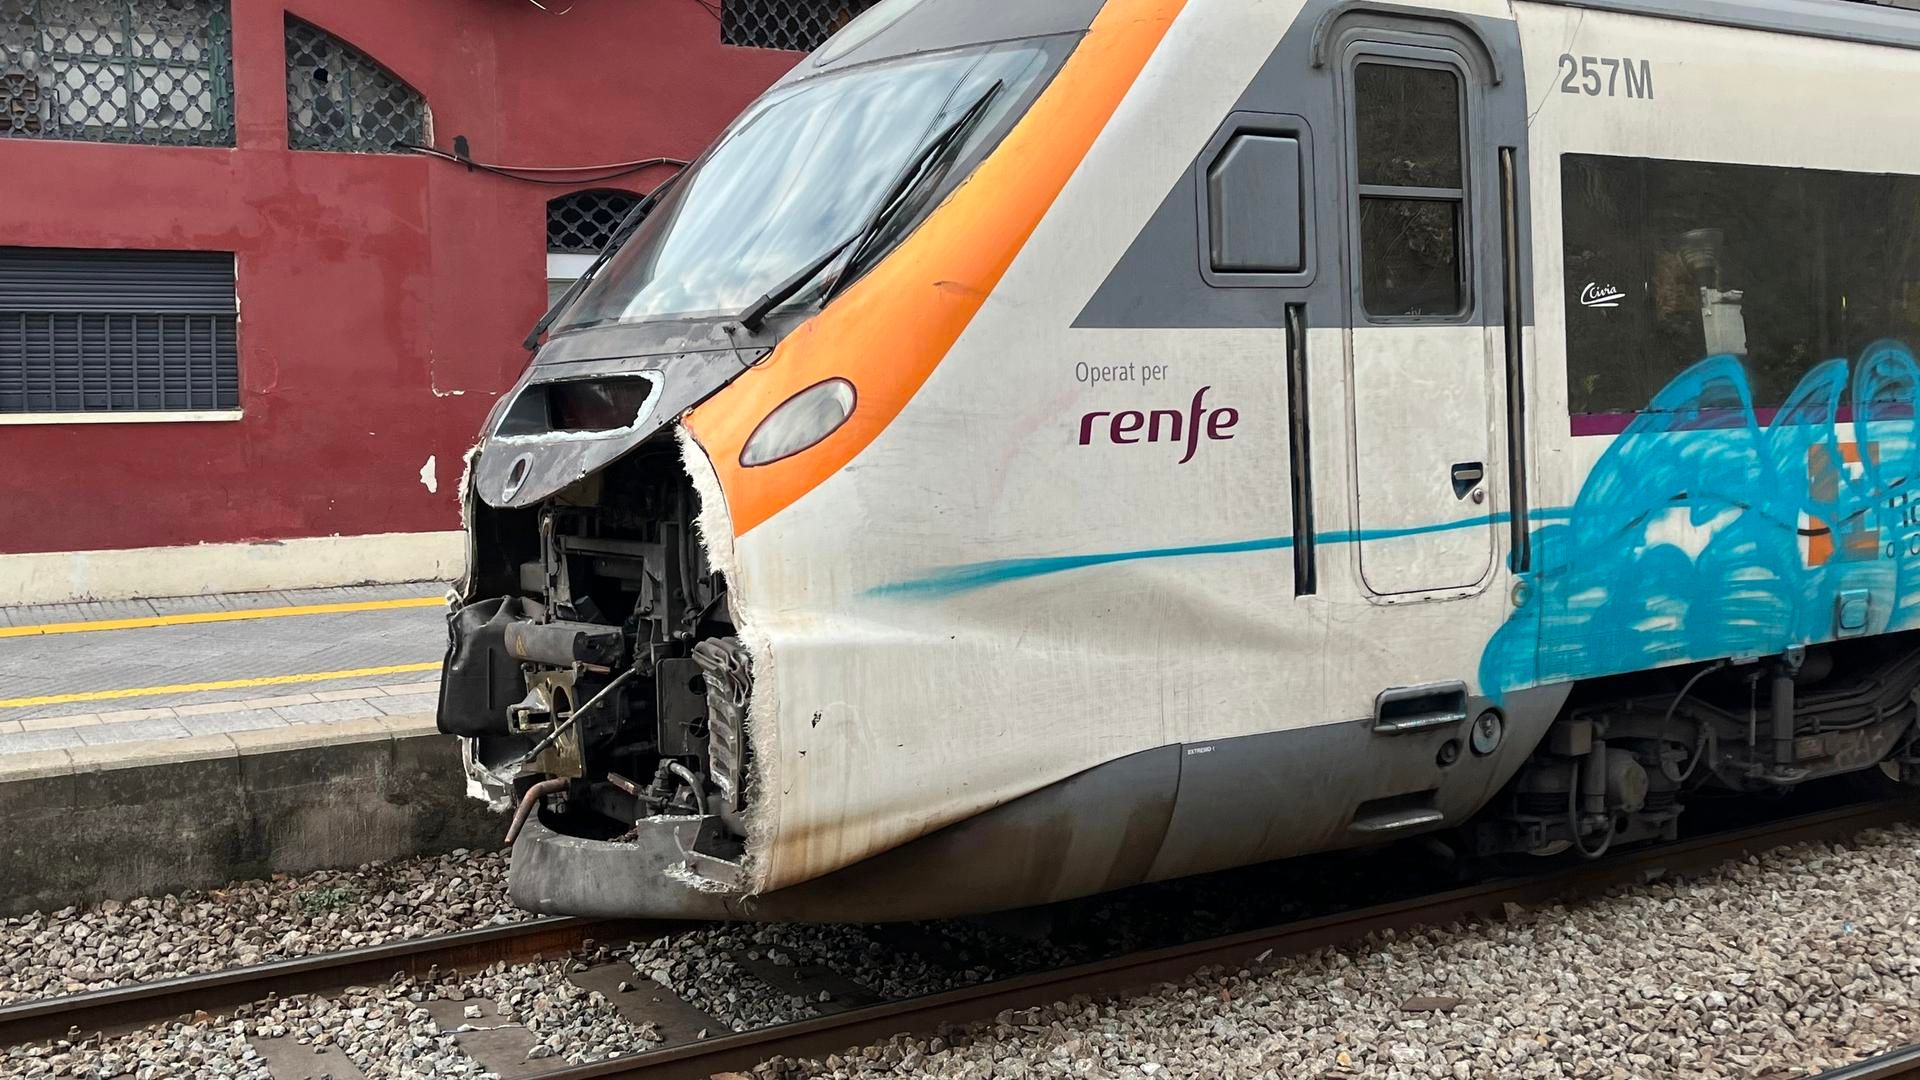 The injured within the collision of two trains at Montcada station are discharged